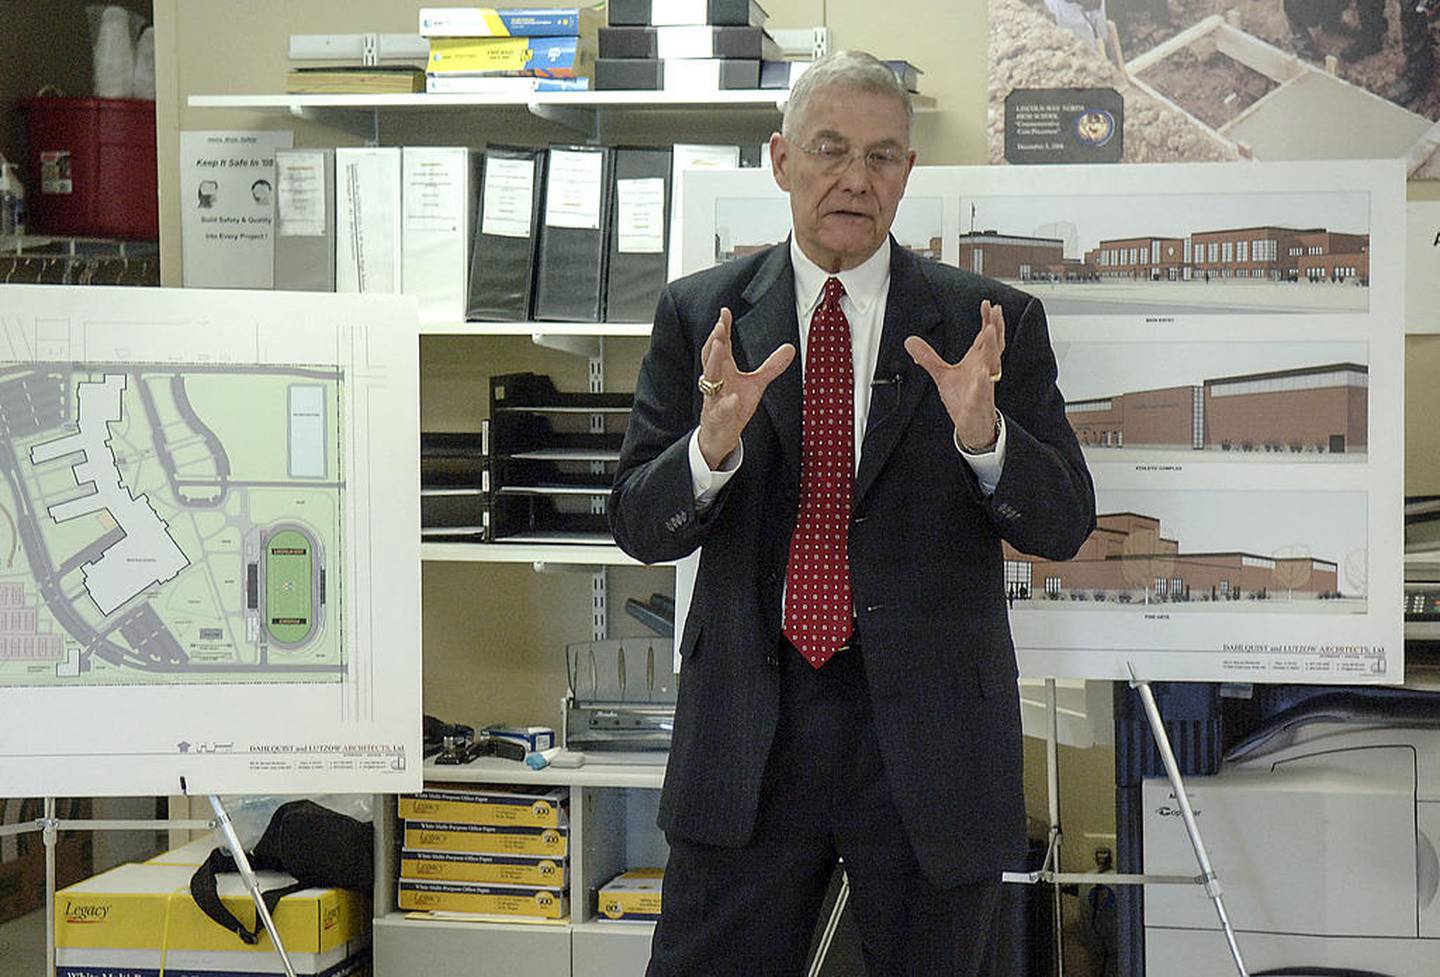 Former Lincoln-Way High School District 210 Superintendent Lawrence Wyllie displays renderings of the Lincoln-Way North High School building April 12, 2008, in Frankfort. Wyllie has faced federal fraud charges for more than three years.